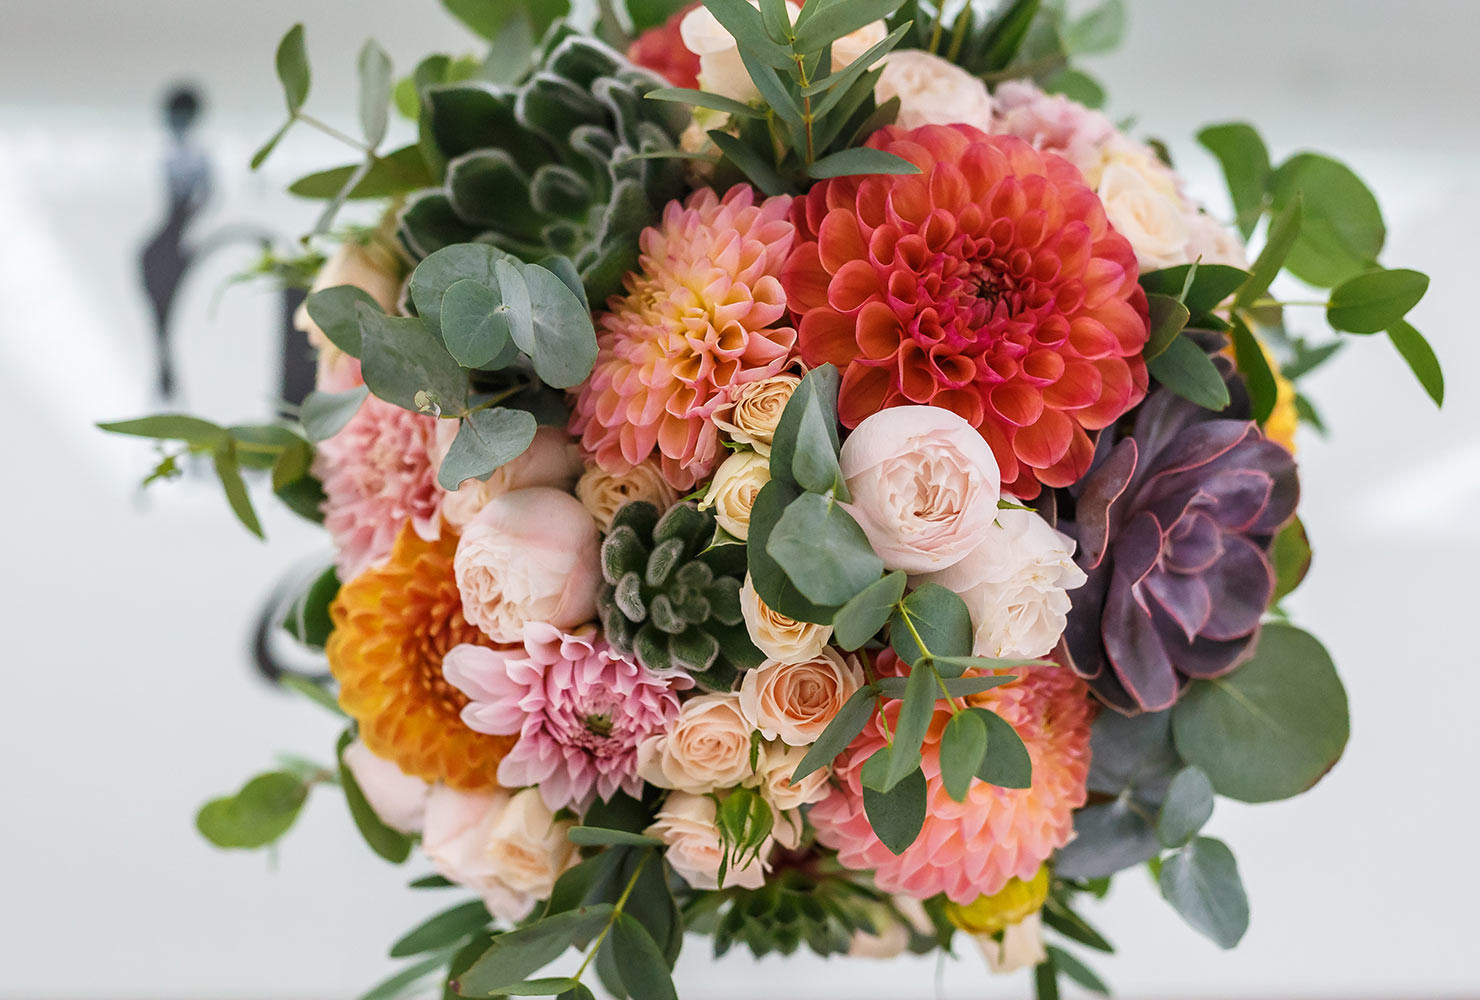 Popular Flowers For Weddings
 The 15 Most Popular Wedding Flowers In 2019